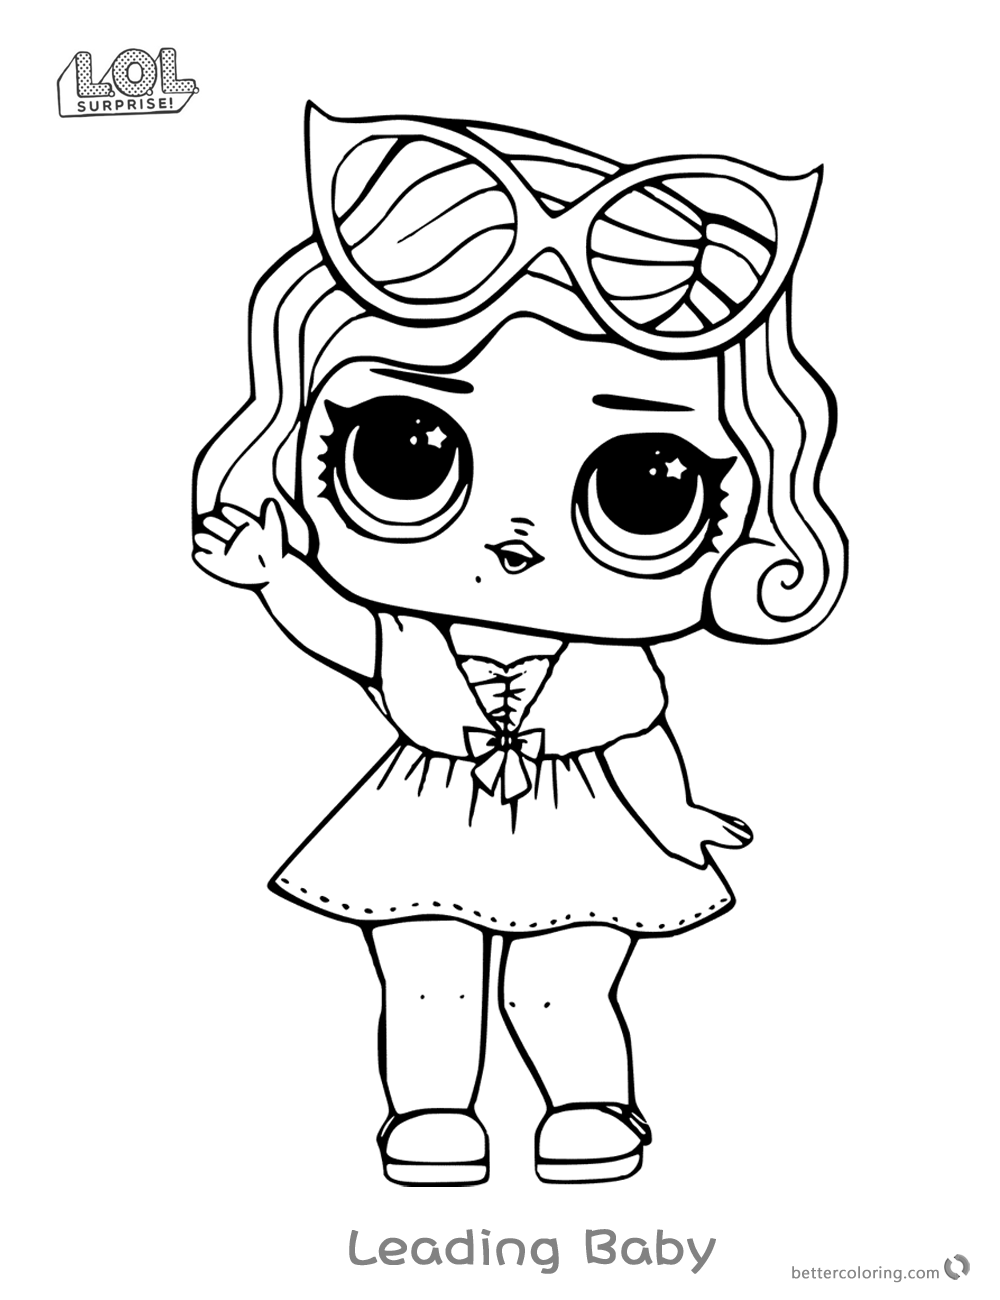 Leading Baby from LOL Surprise Doll Coloring Pages - Free Printable ...